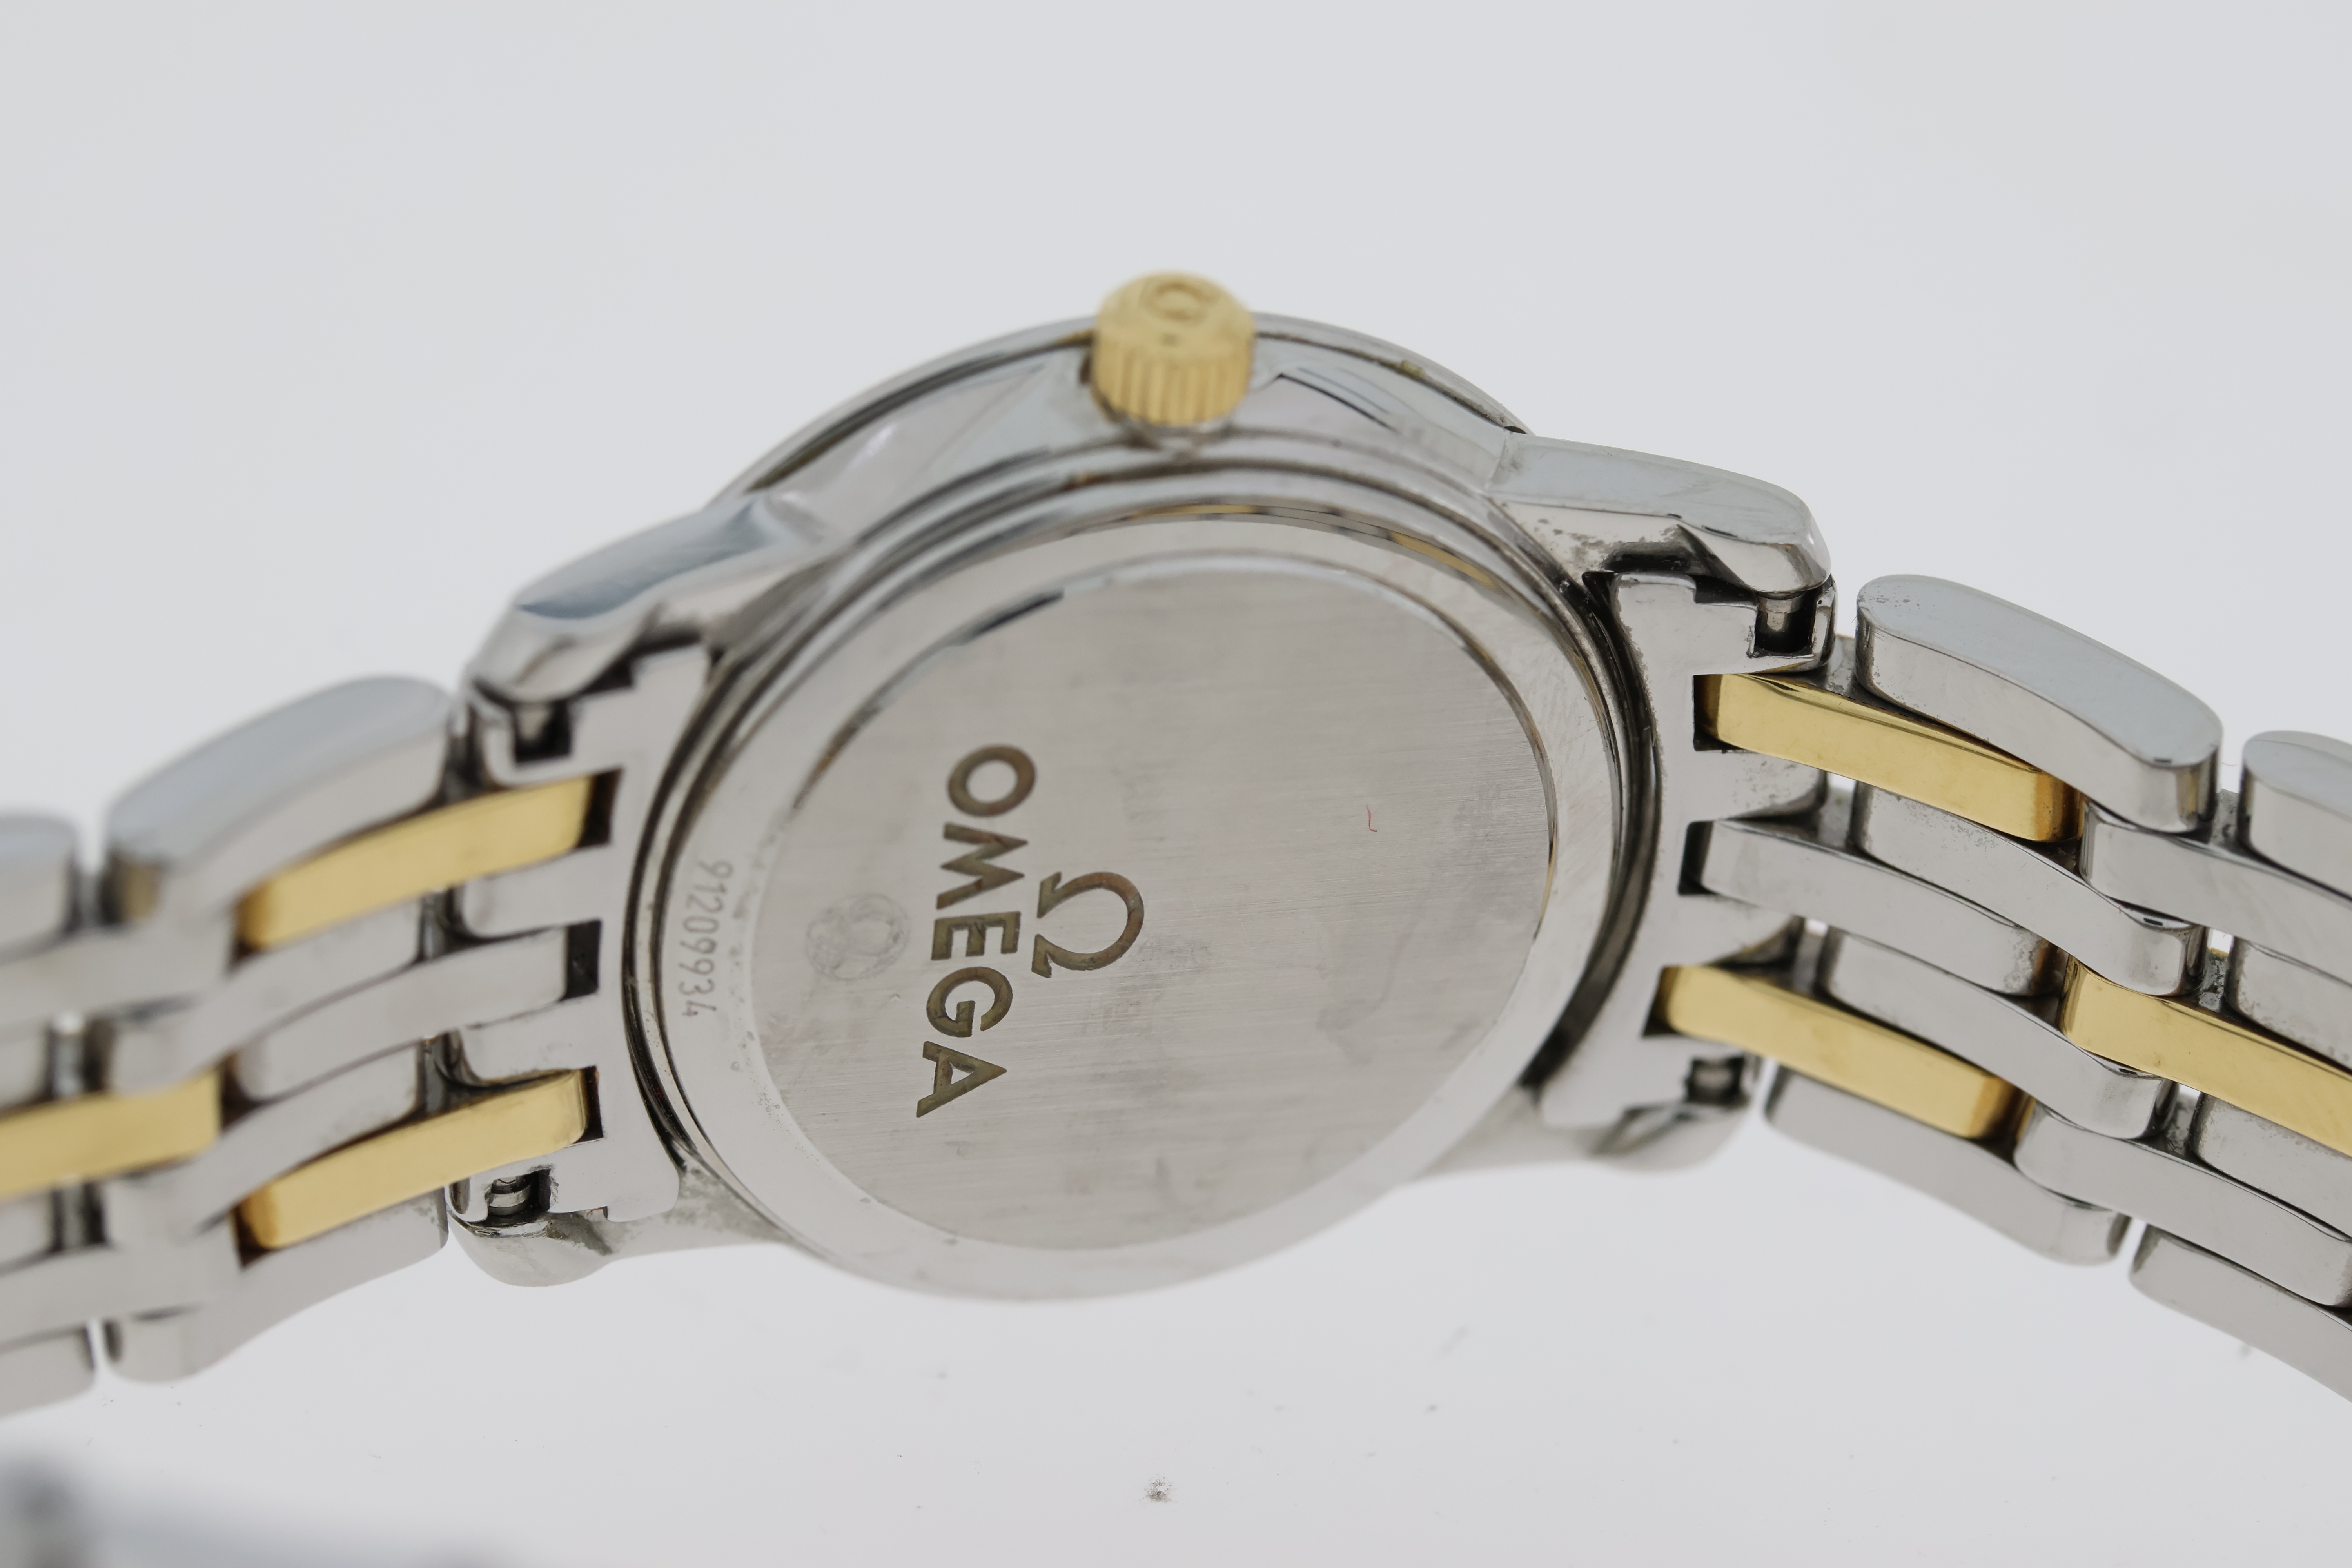 LADIES OMEGA DE VILLE PRESTIGE REFERENCE 43701200 CIRCA 2011 WITH BOX AND PAPERS - Image 9 of 9